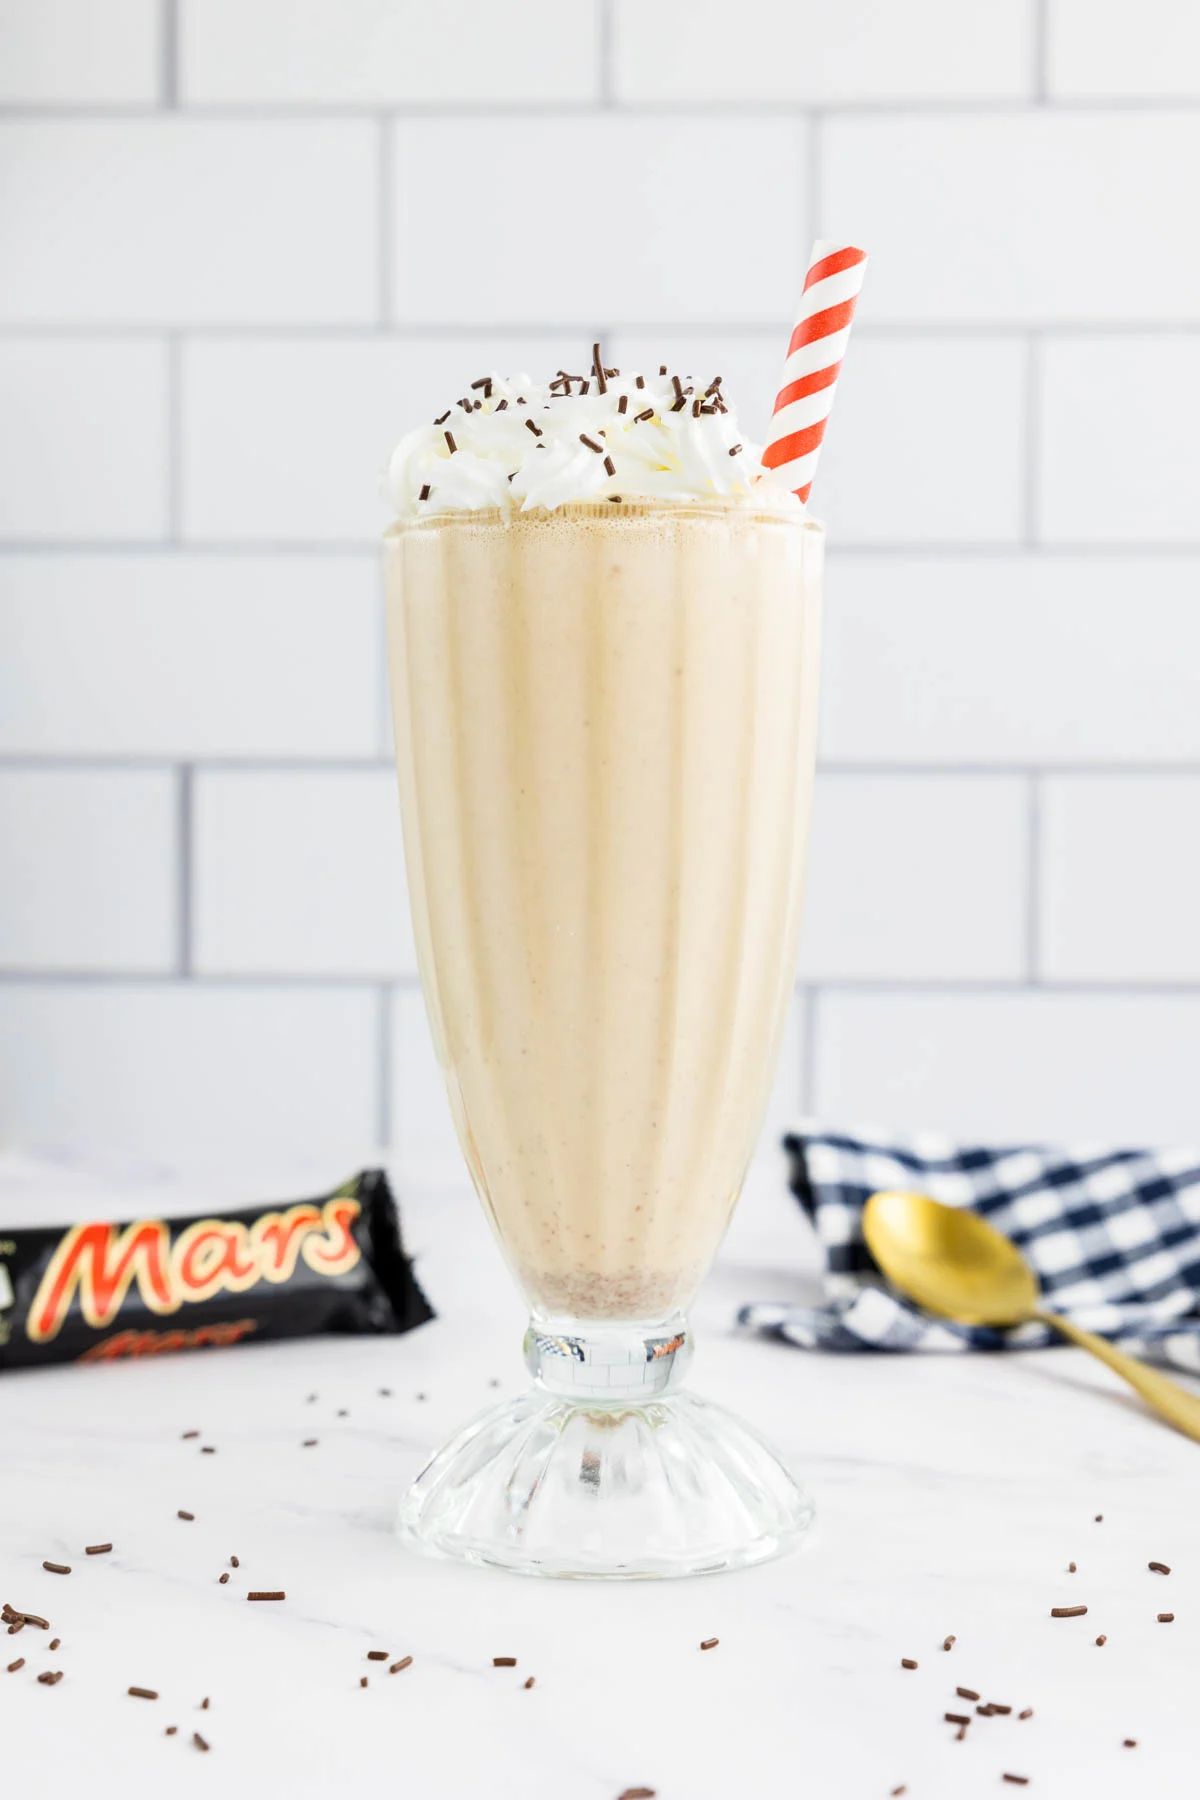 Mar milkshake in a glass with whipped cream and sprinkles